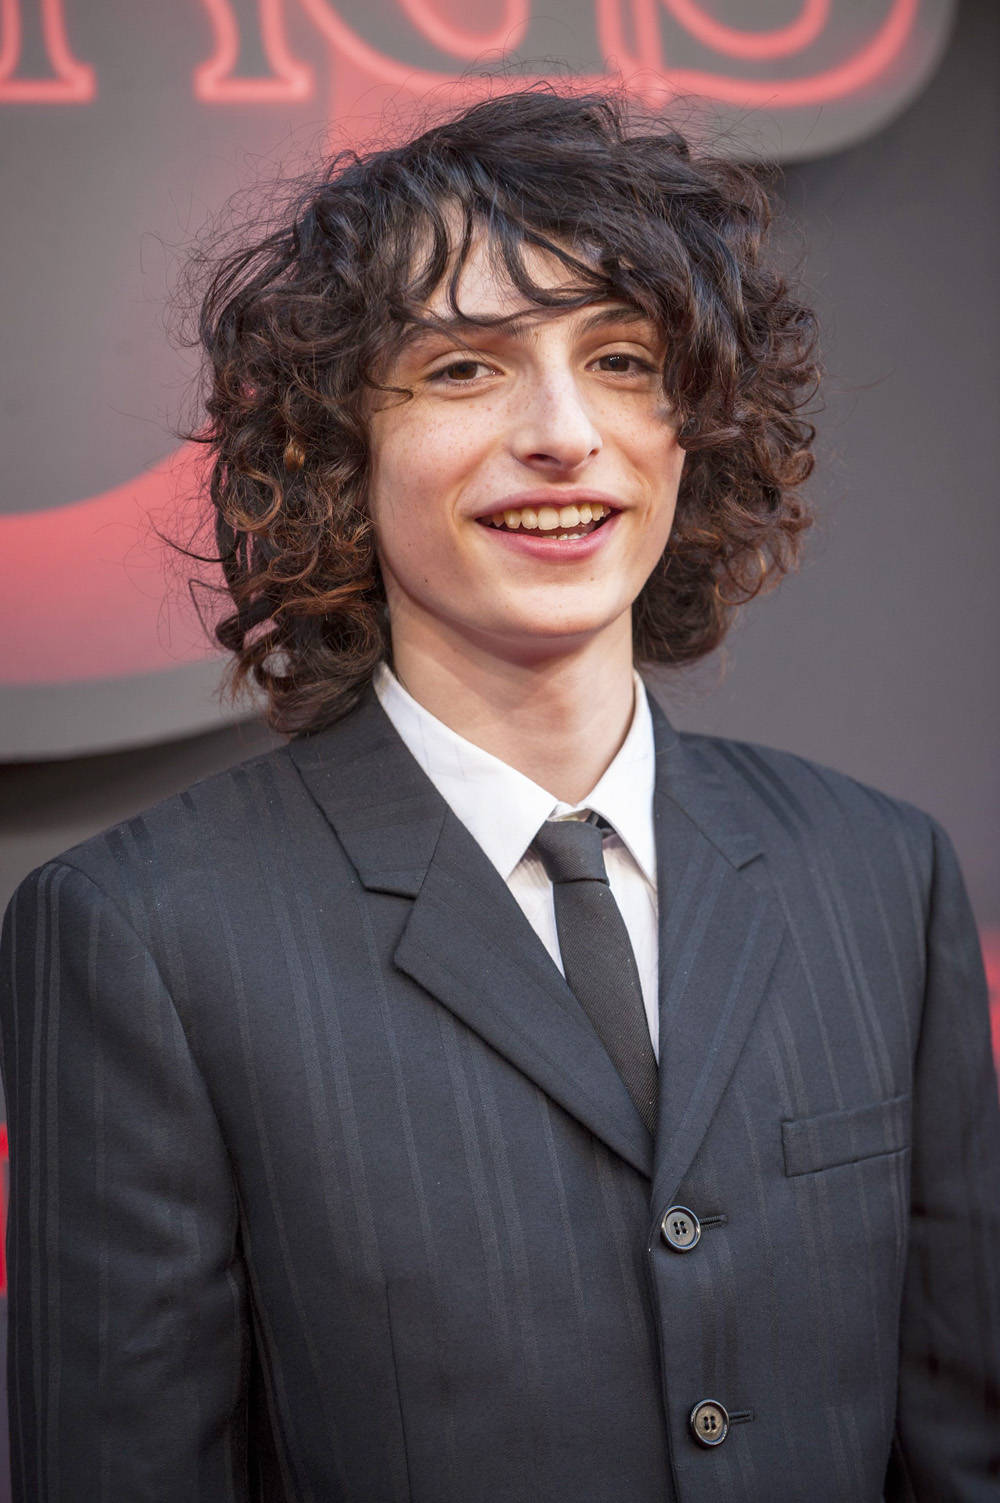 Finn Wolfhard Smiling On Stage Background